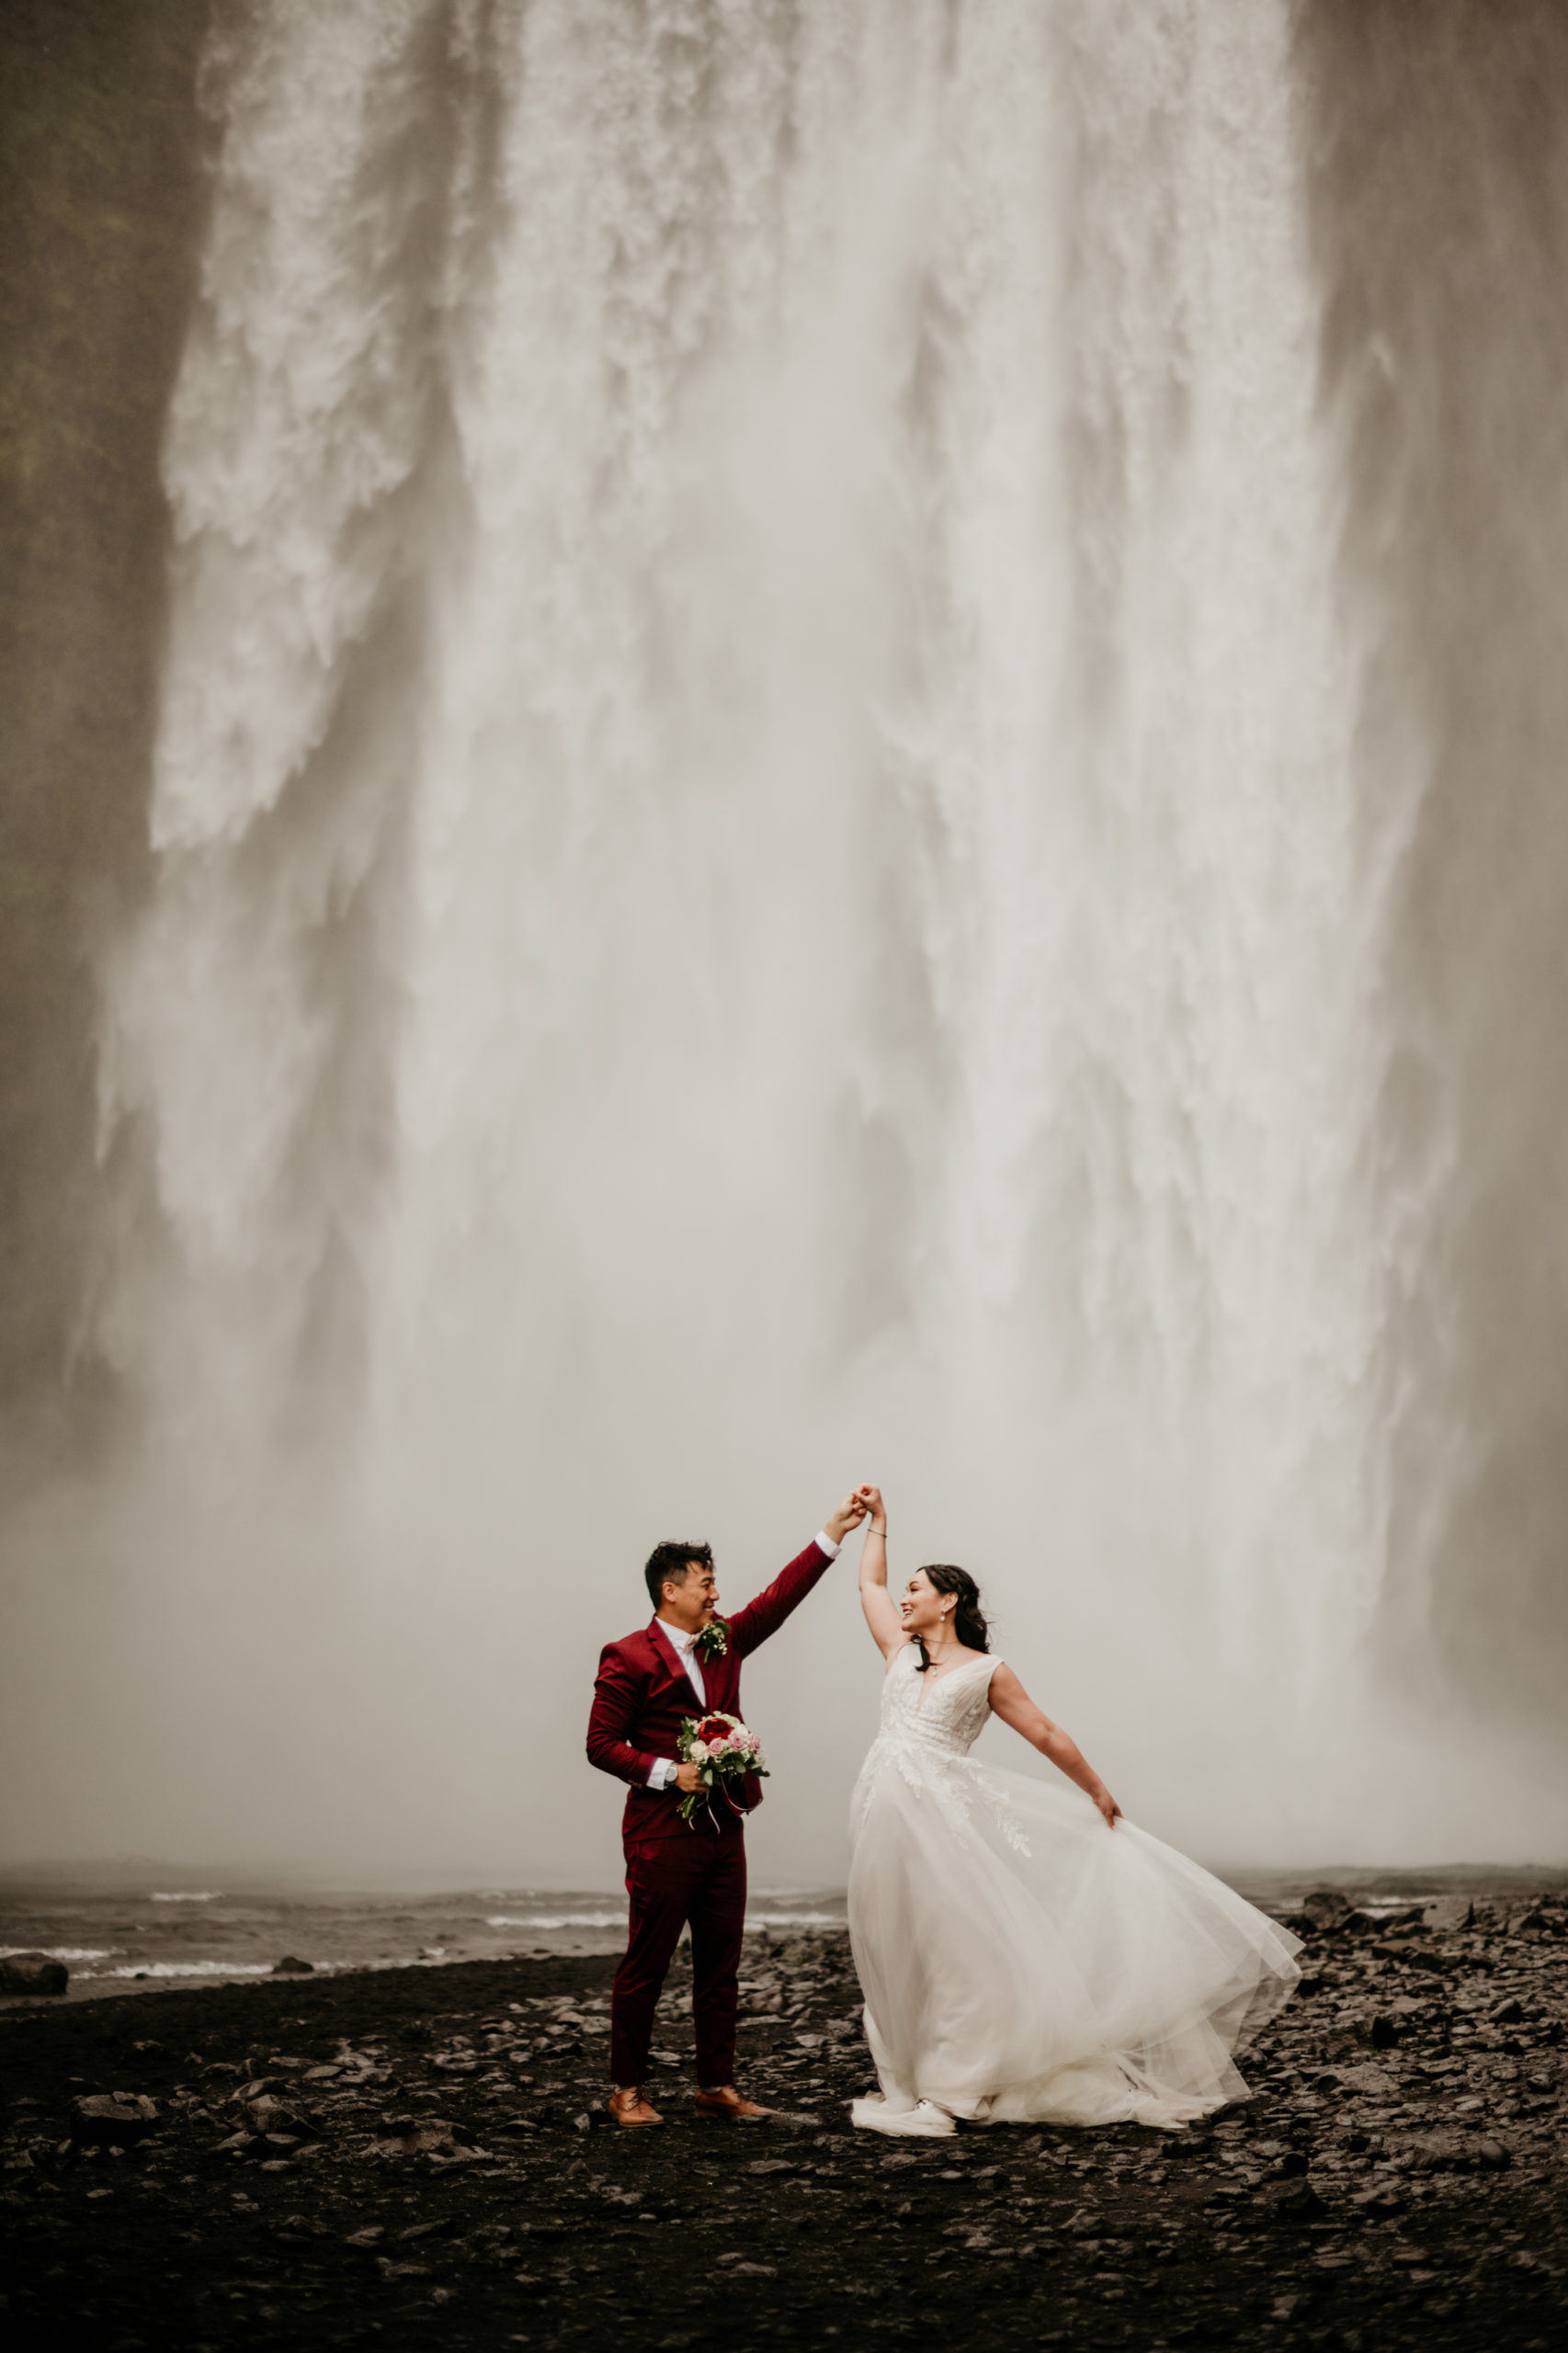 During their Iceland elopement at Reynisfjara, a bride and groom explored Skogafoss and seljalandsfoss. Iceland is a one of a kind and adventurous elopement location and MUST be explored! If you're wondering how to elope in Iceland, see how these two did it! 